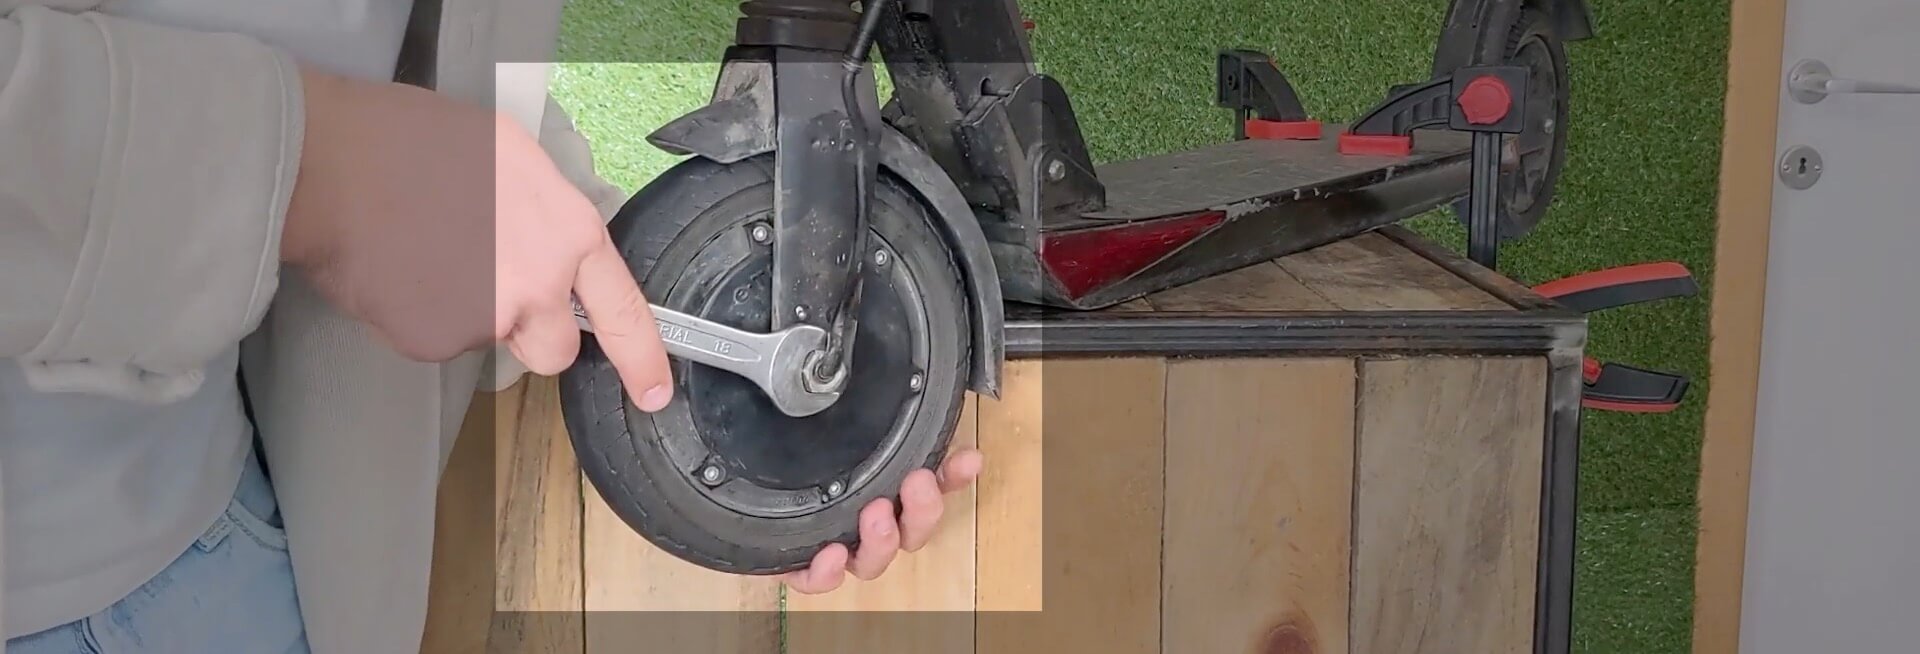 Removing the wheel from the electric scooter